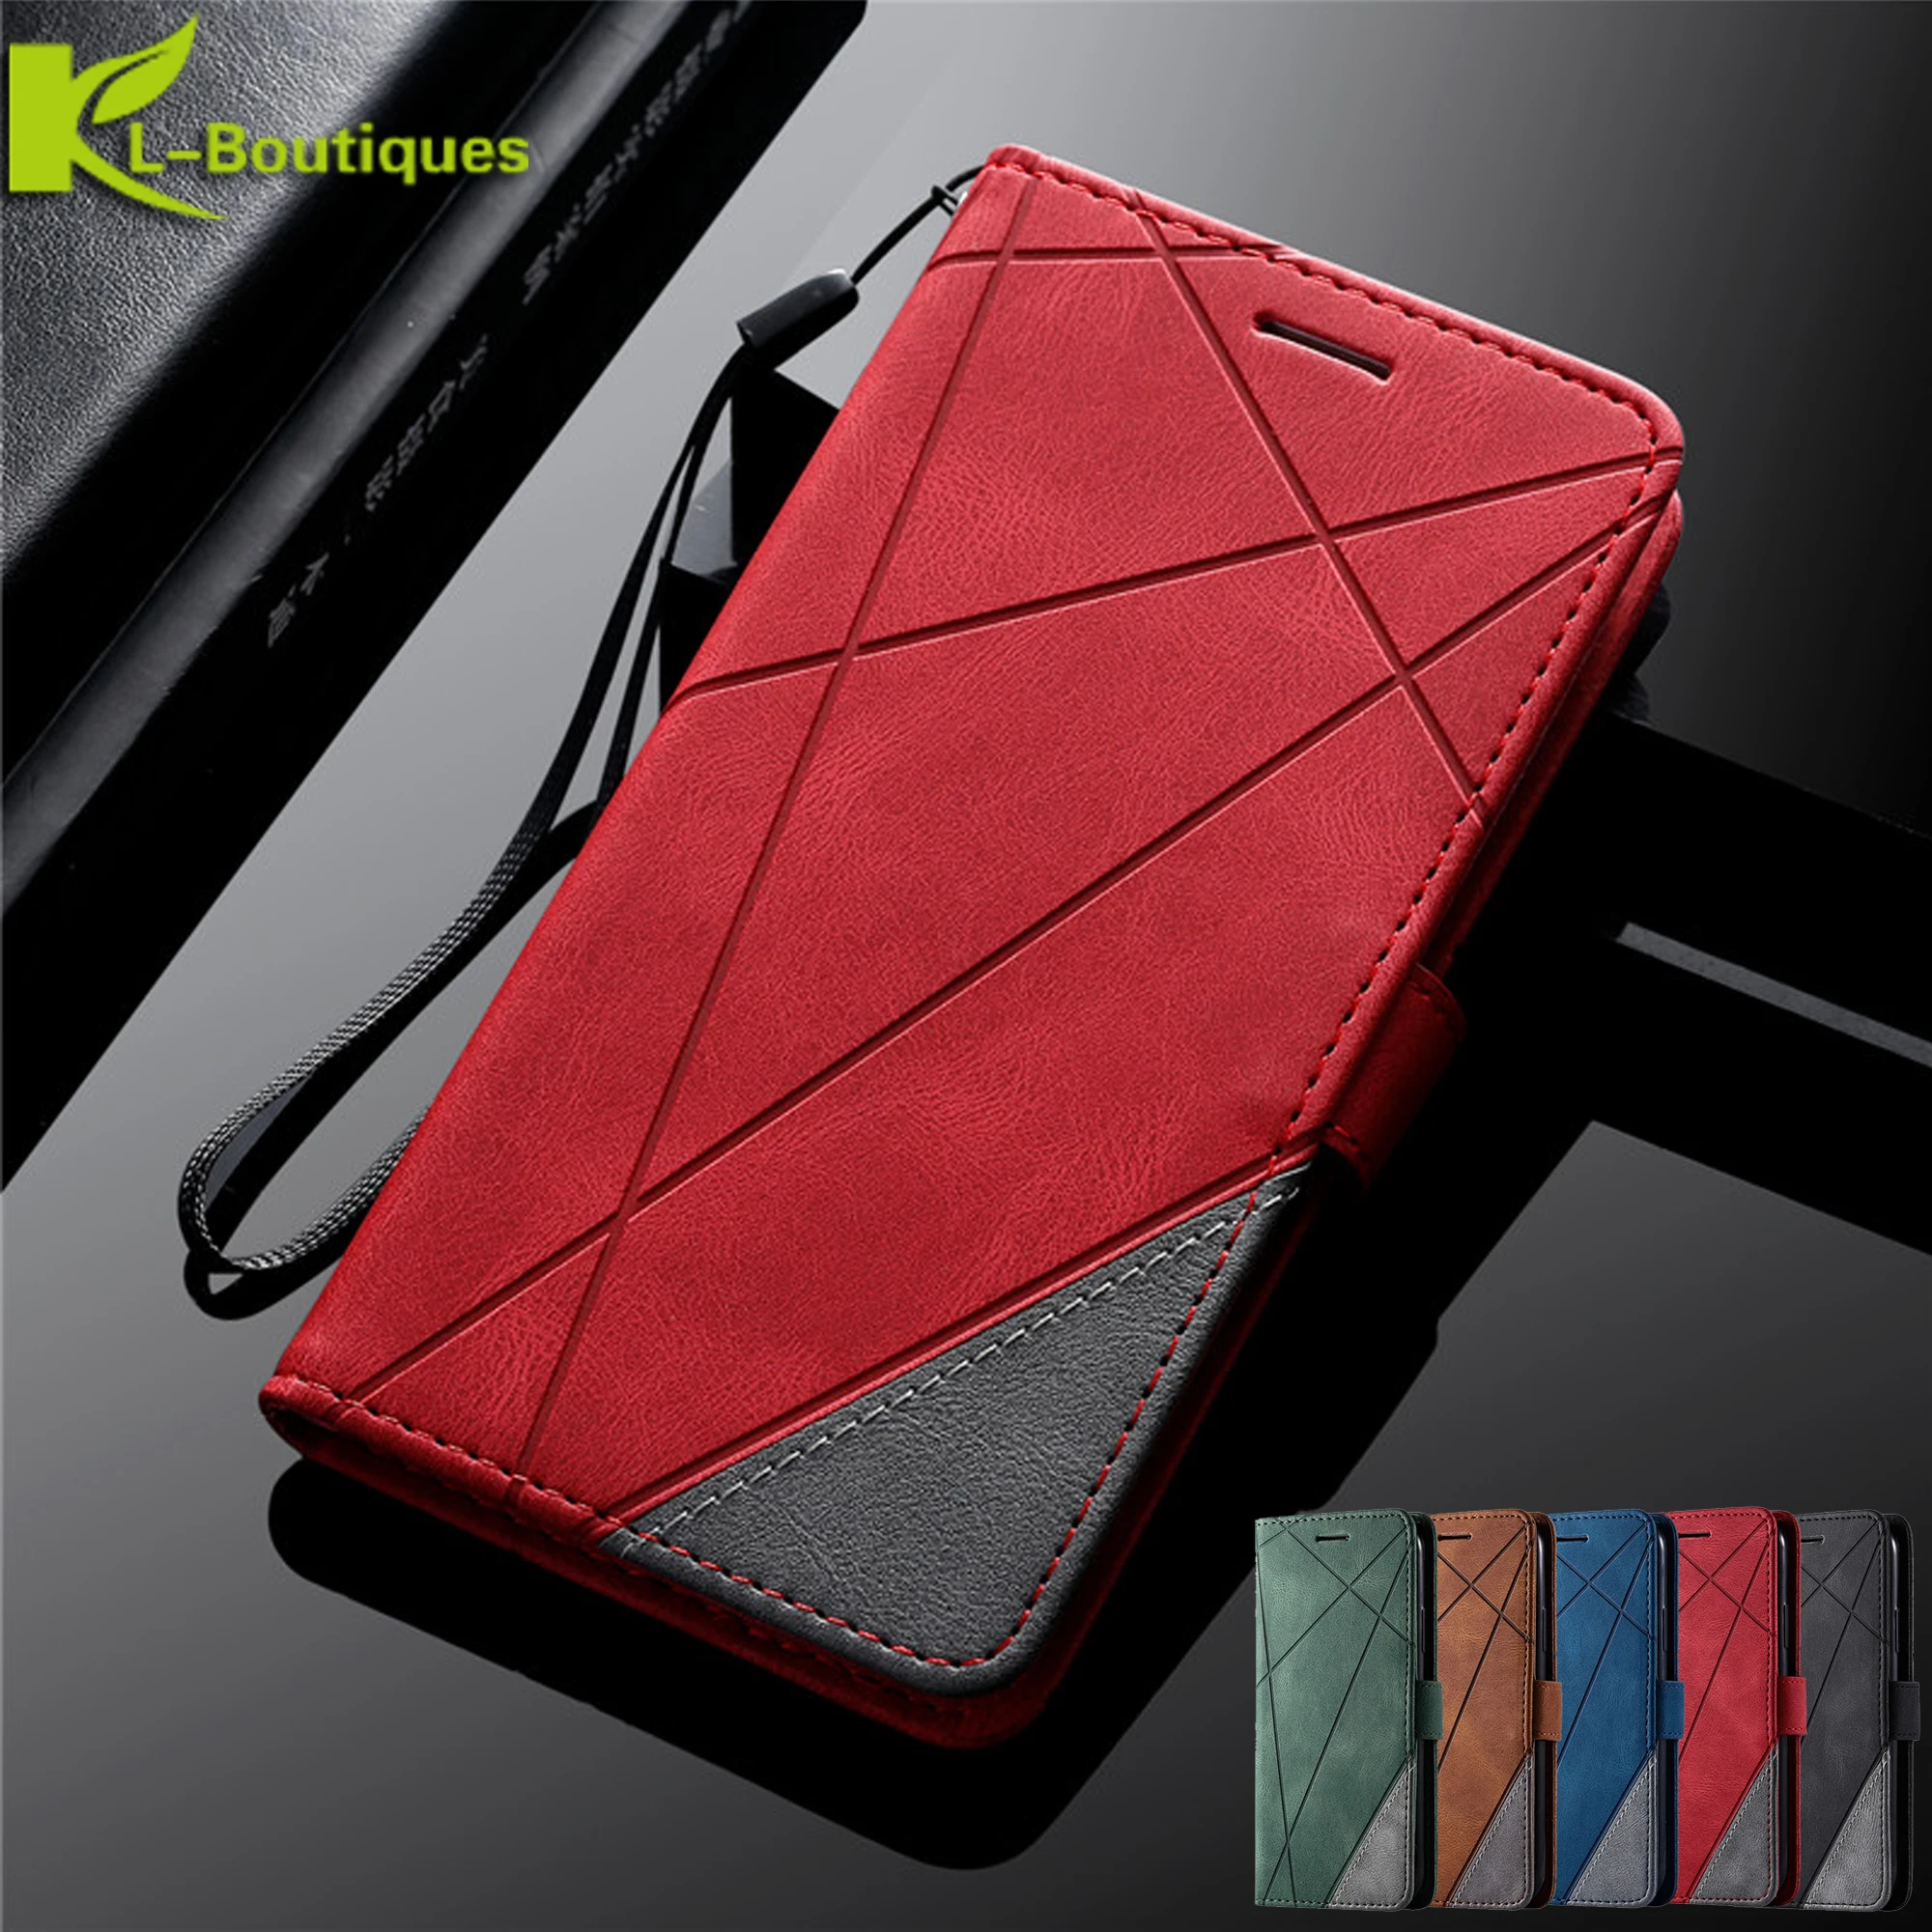 

Case on For Funda Samsung Galaxy A51 4G A515 SM-A515F Wallet Card Slot Coque For Samsung A51 5G UW A 51 A516 Flip Protect Cover